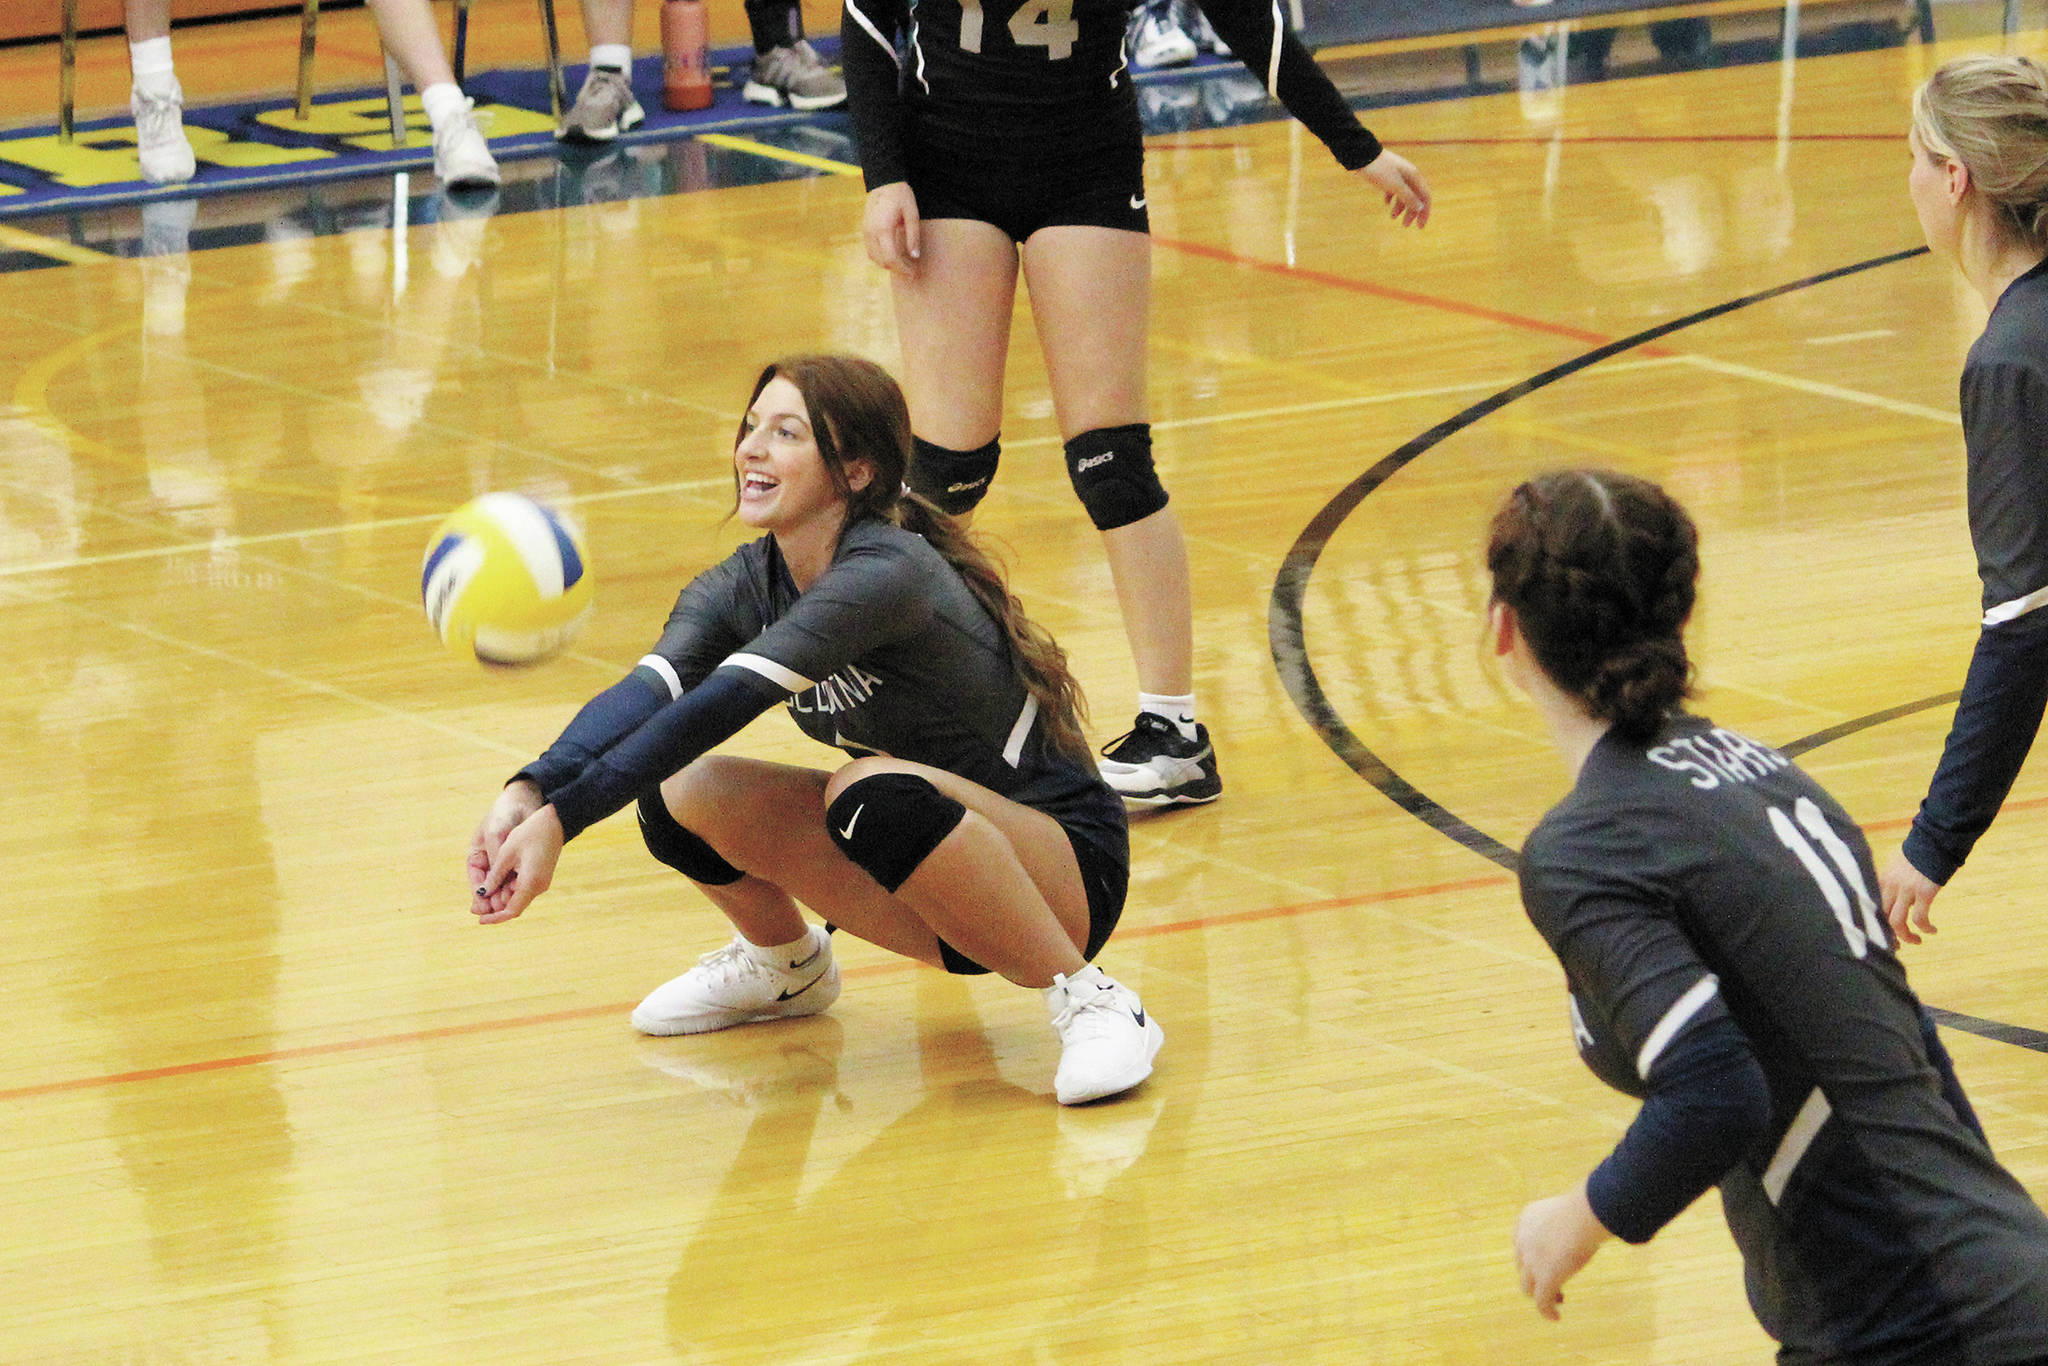 Soldotna’s Sarah Rice digs the ball during a Tuesday, Sept. 22, 2020 volleyball game against Homer High School in the Alice Witte Gymnasium in Homer, Alaska. (Photo by Megan Pacer/Homer News)